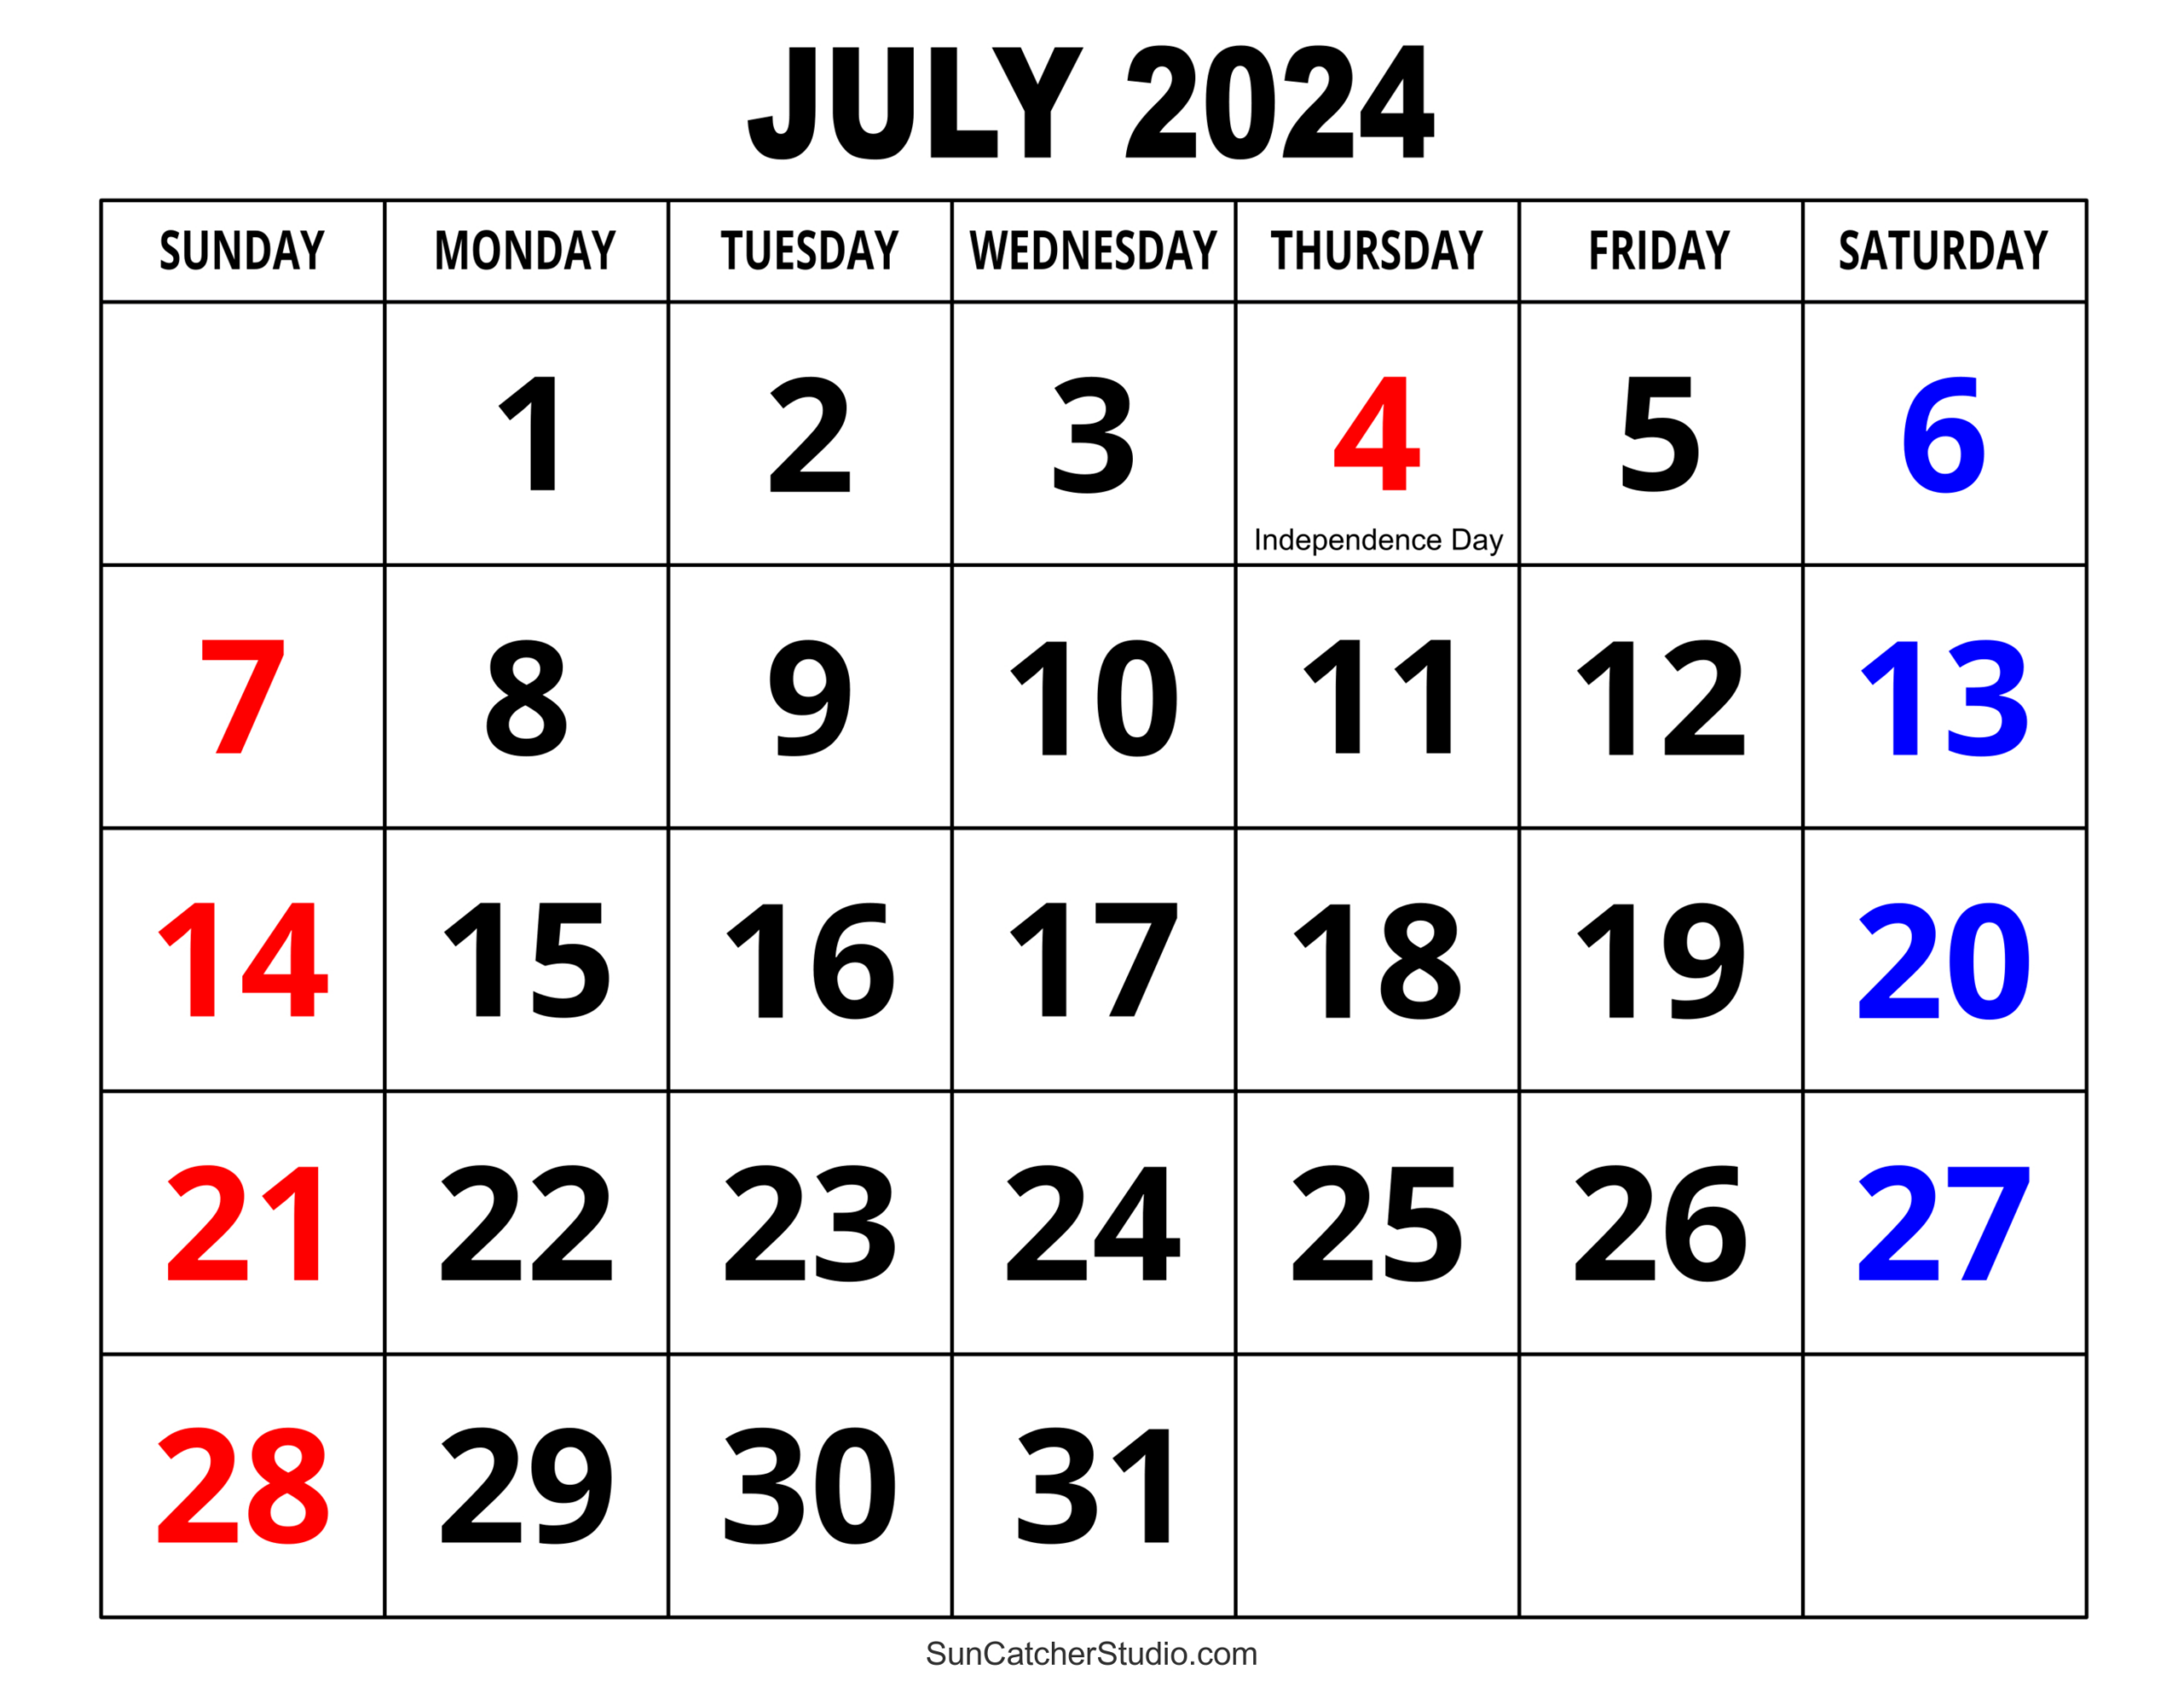 July 2024 Calendar (Free Printable) – Diy Projects, Patterns within July 2024 Calendar Big Numbers